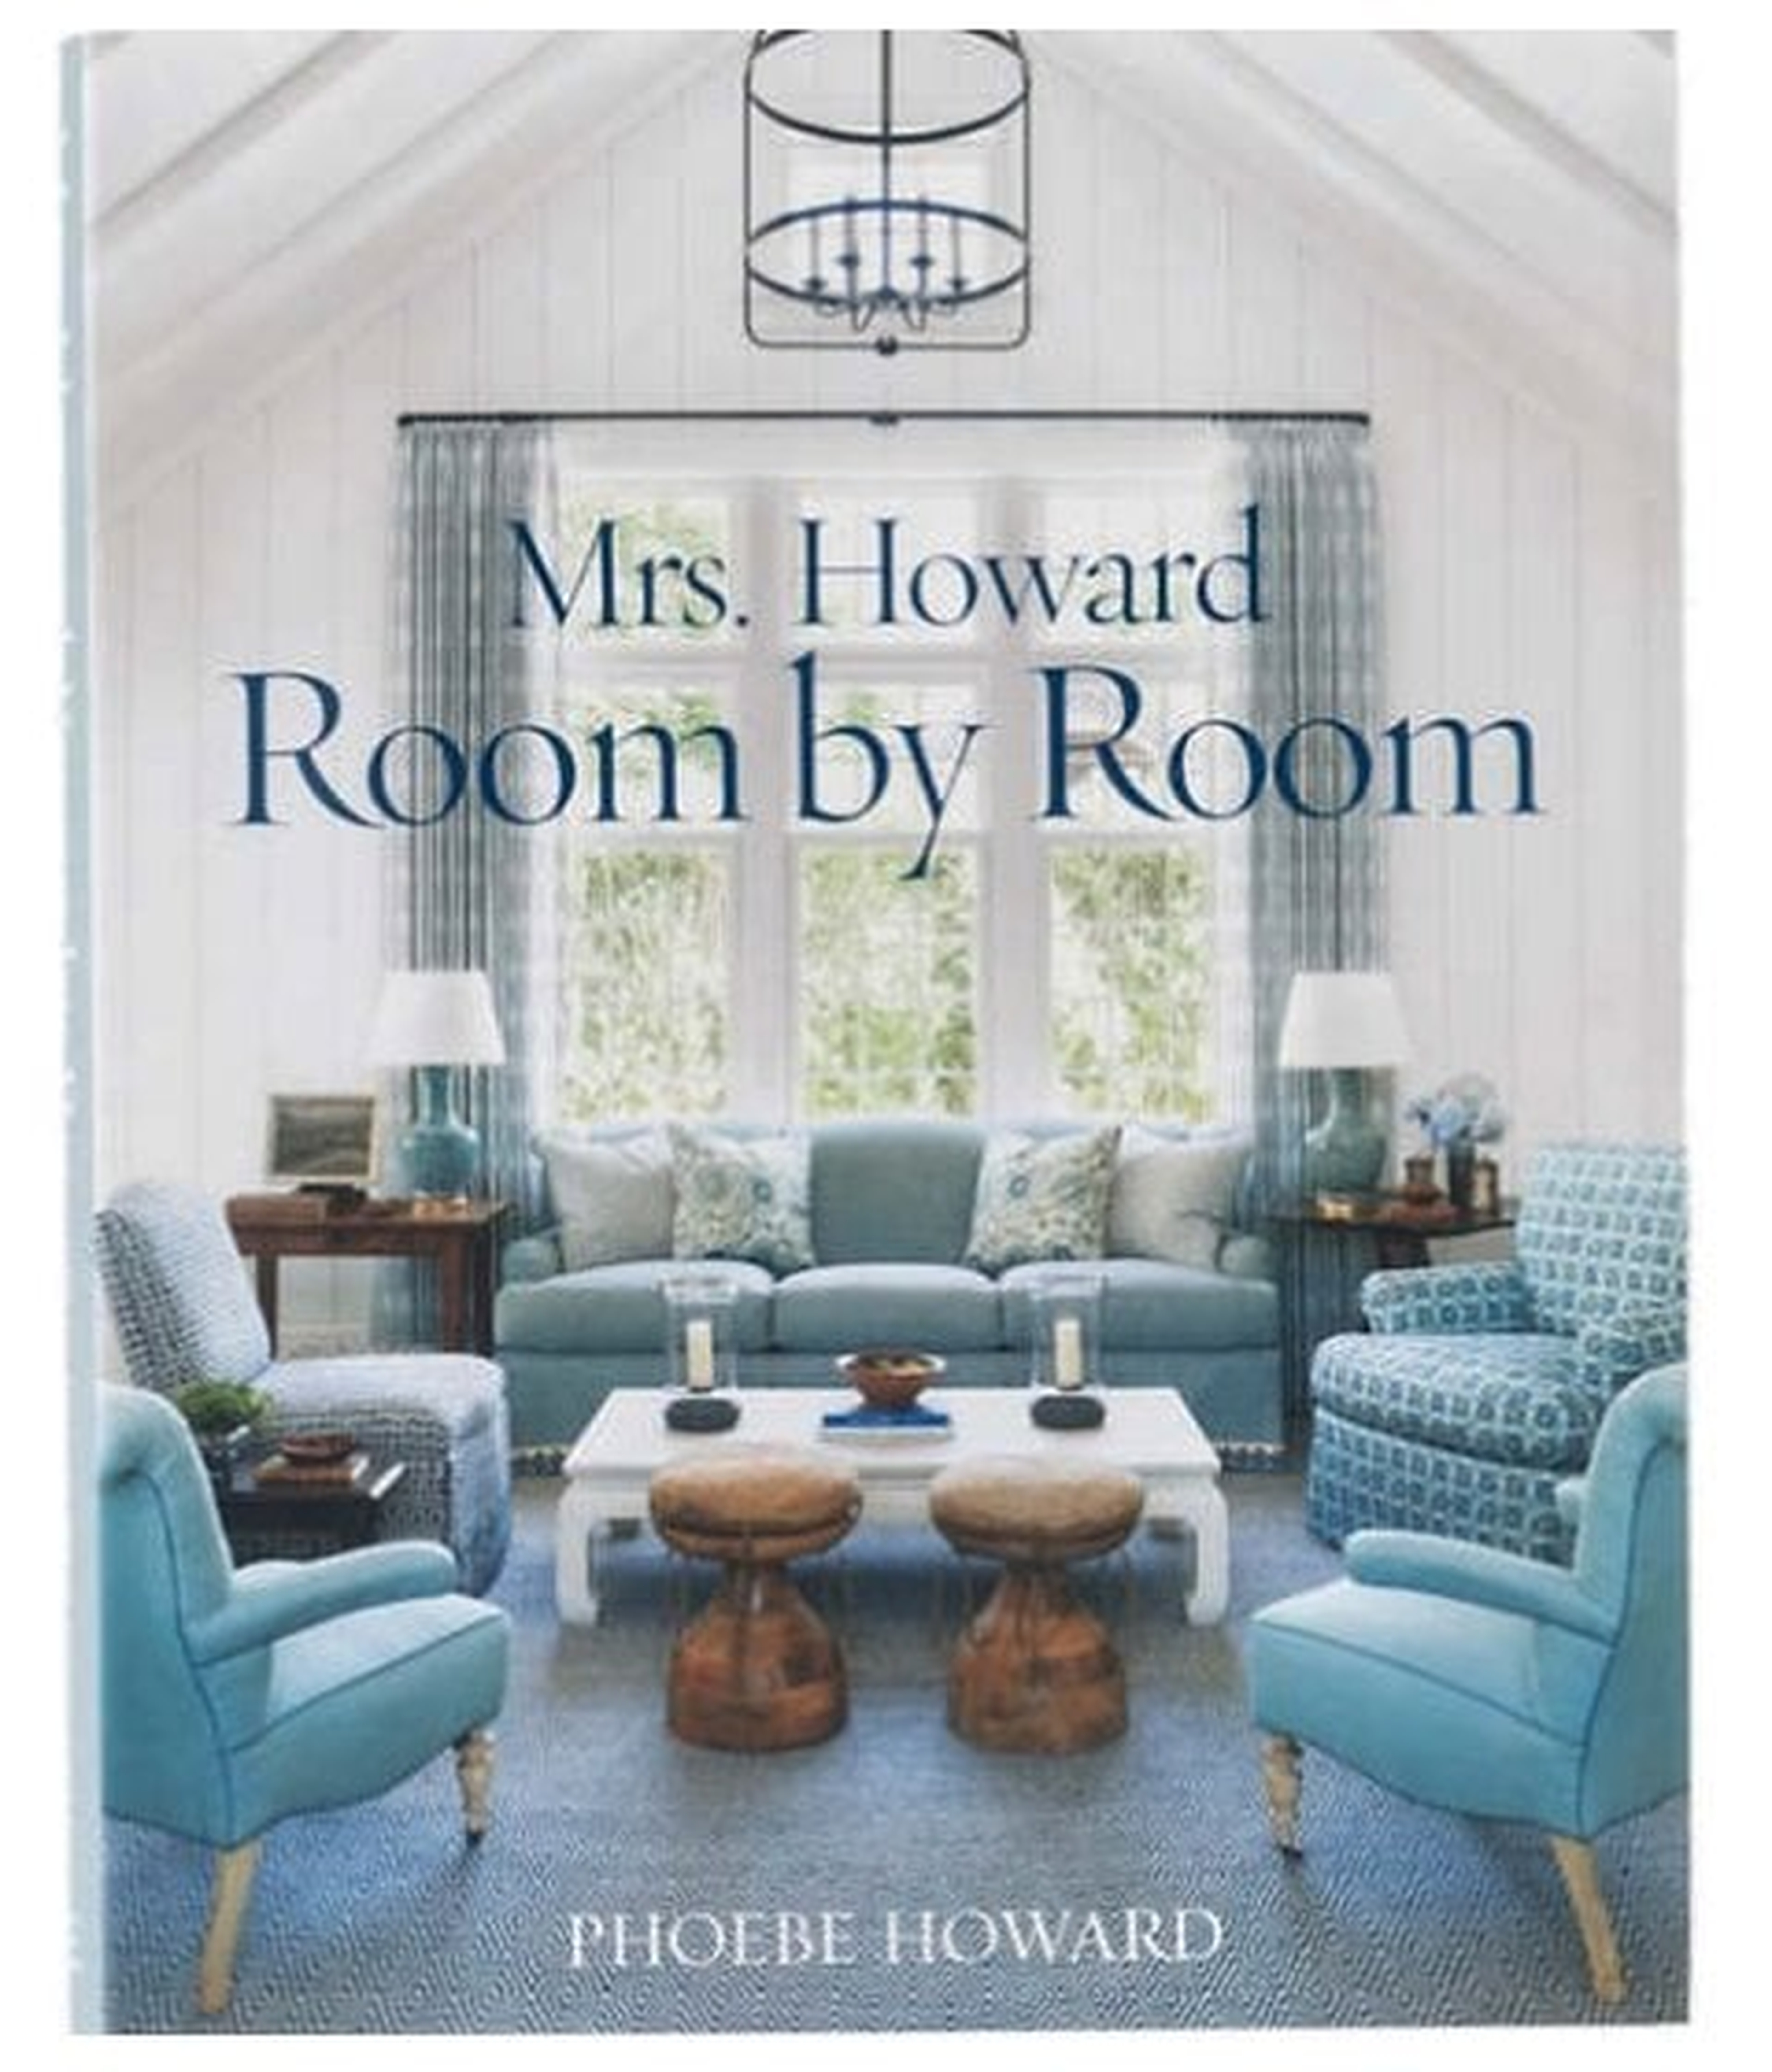 MRS. HOWARD, ROOM BY ROOM: THE ESSENTIALS OF DECORATING WITH SOUTHERN STYLE BOOK - Dash and Albert